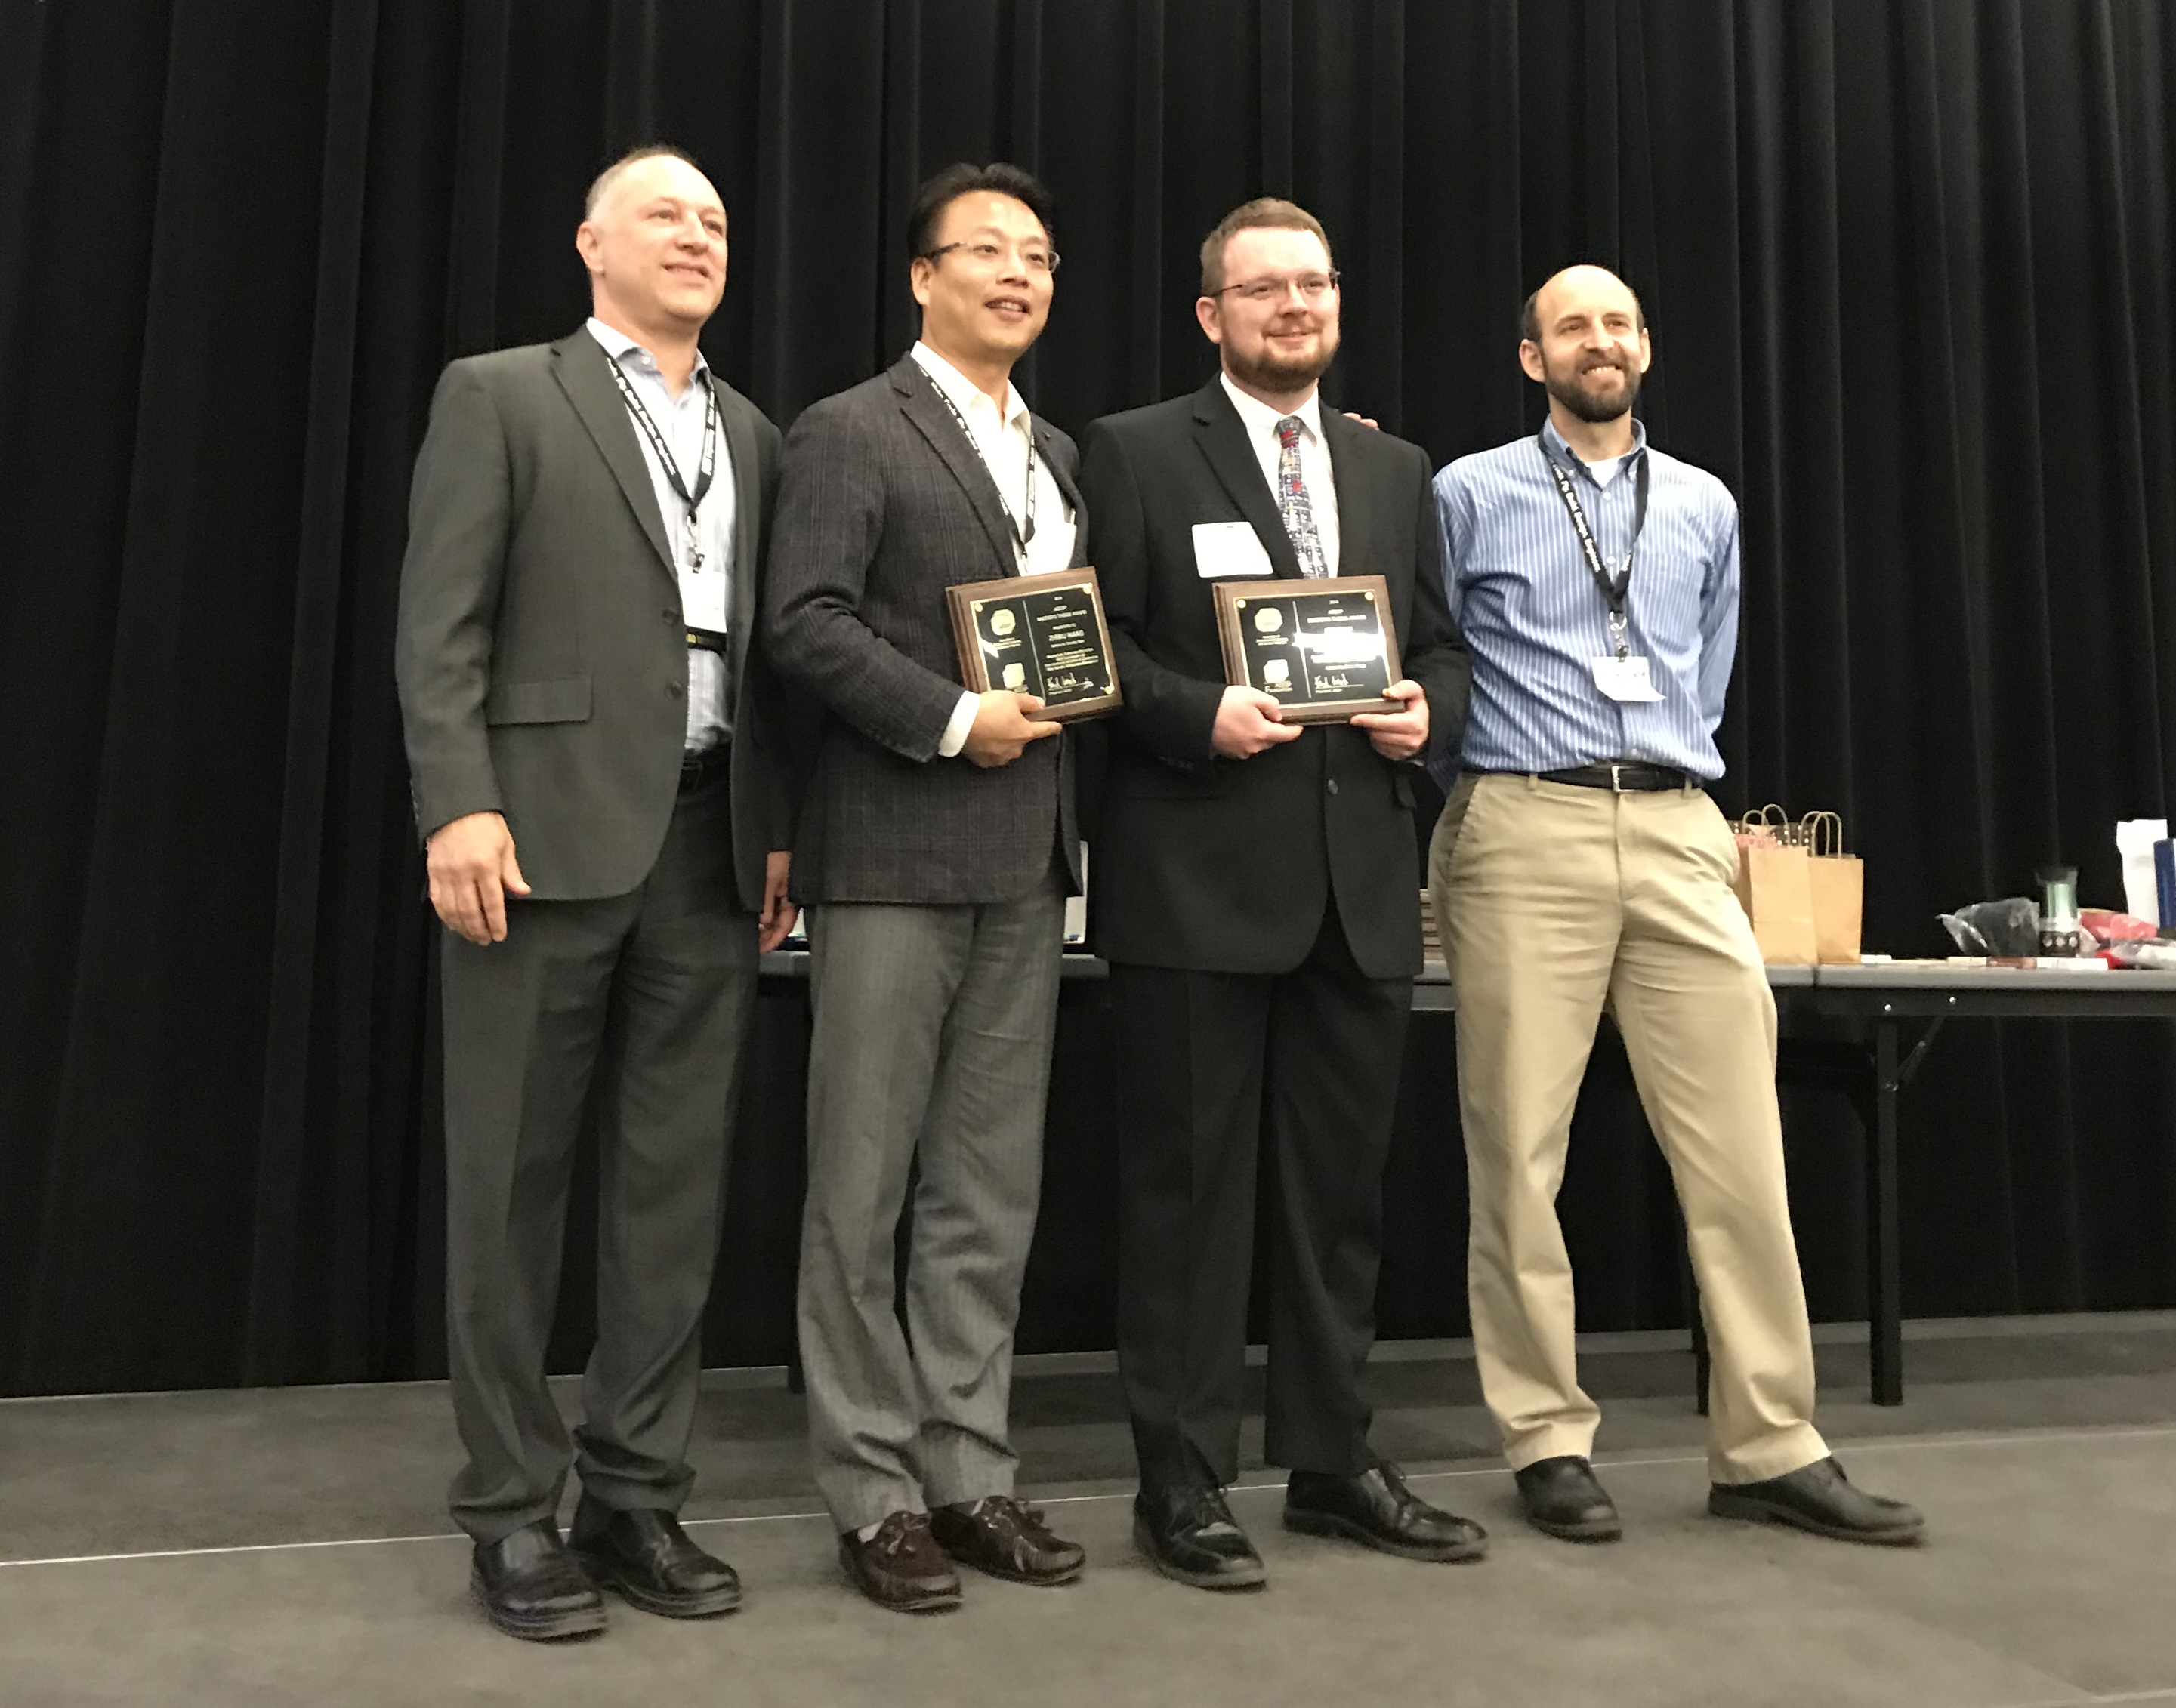 Tim Kent received his AEESP Master’s Thesis Award on the topic of “Mechanical Understanding of the NOB suppression by Free Ammonia Inhibition in Continuous Flow Bioreactors” in AEESP 2019 at Tempe, Arizona on May 16